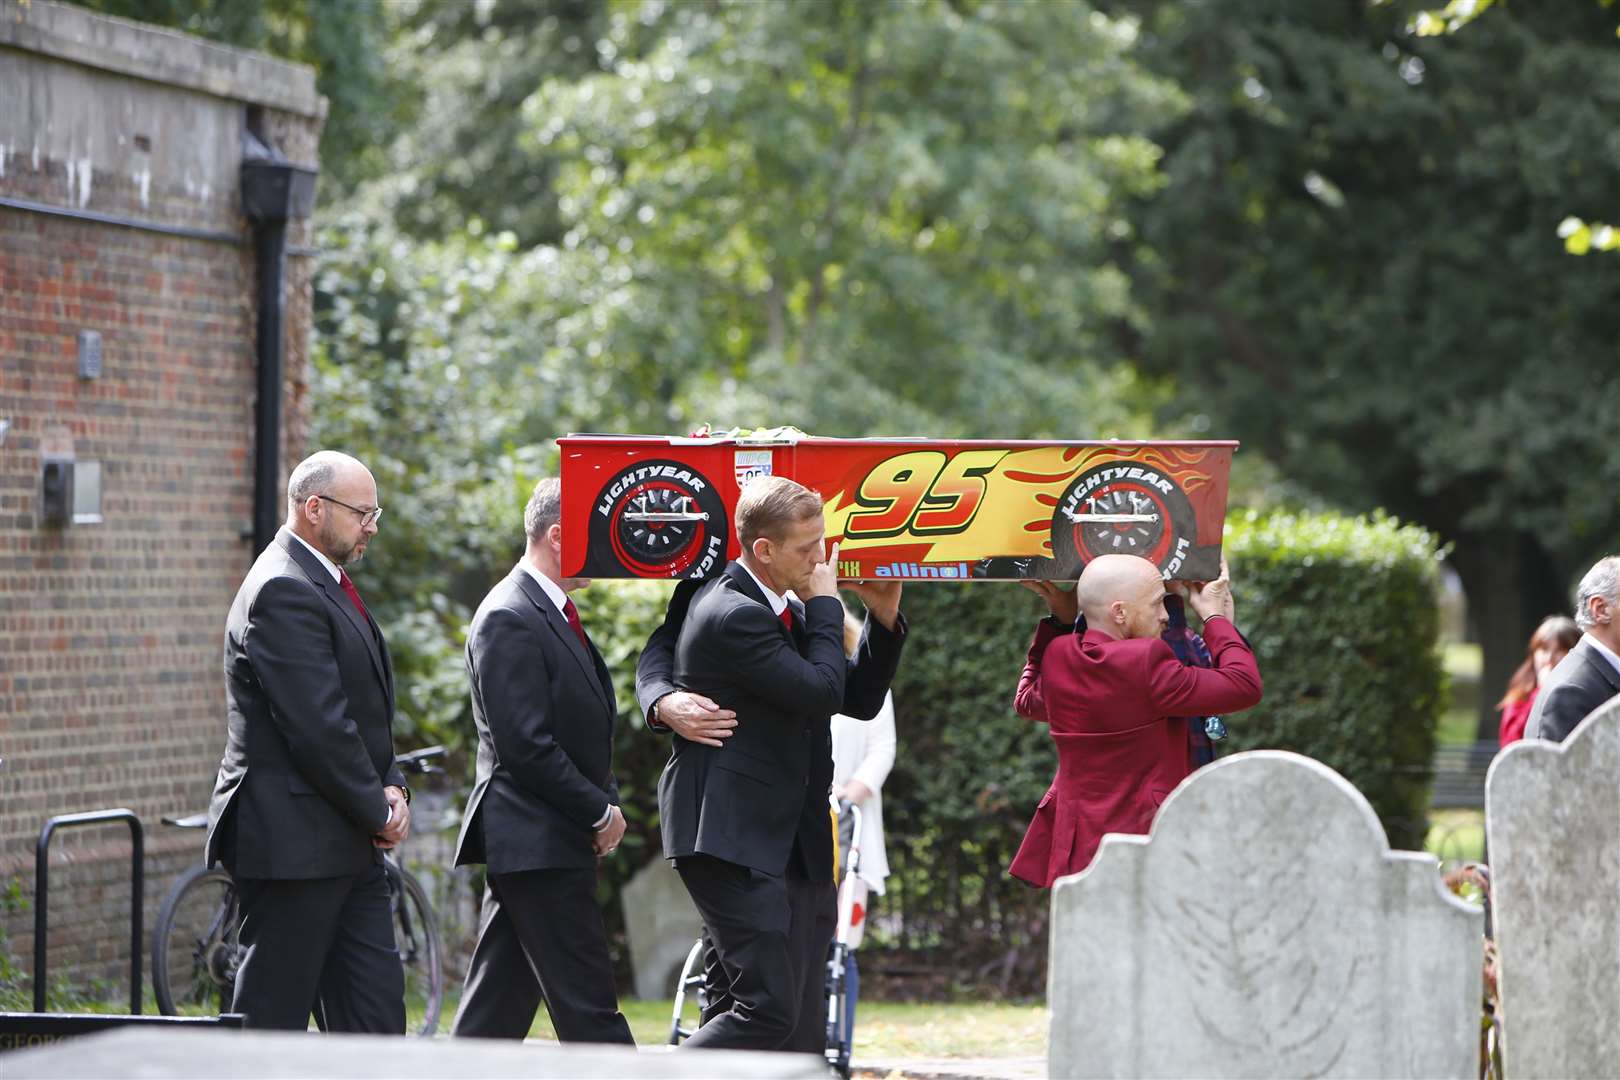 Lucas' coffin carried after the service